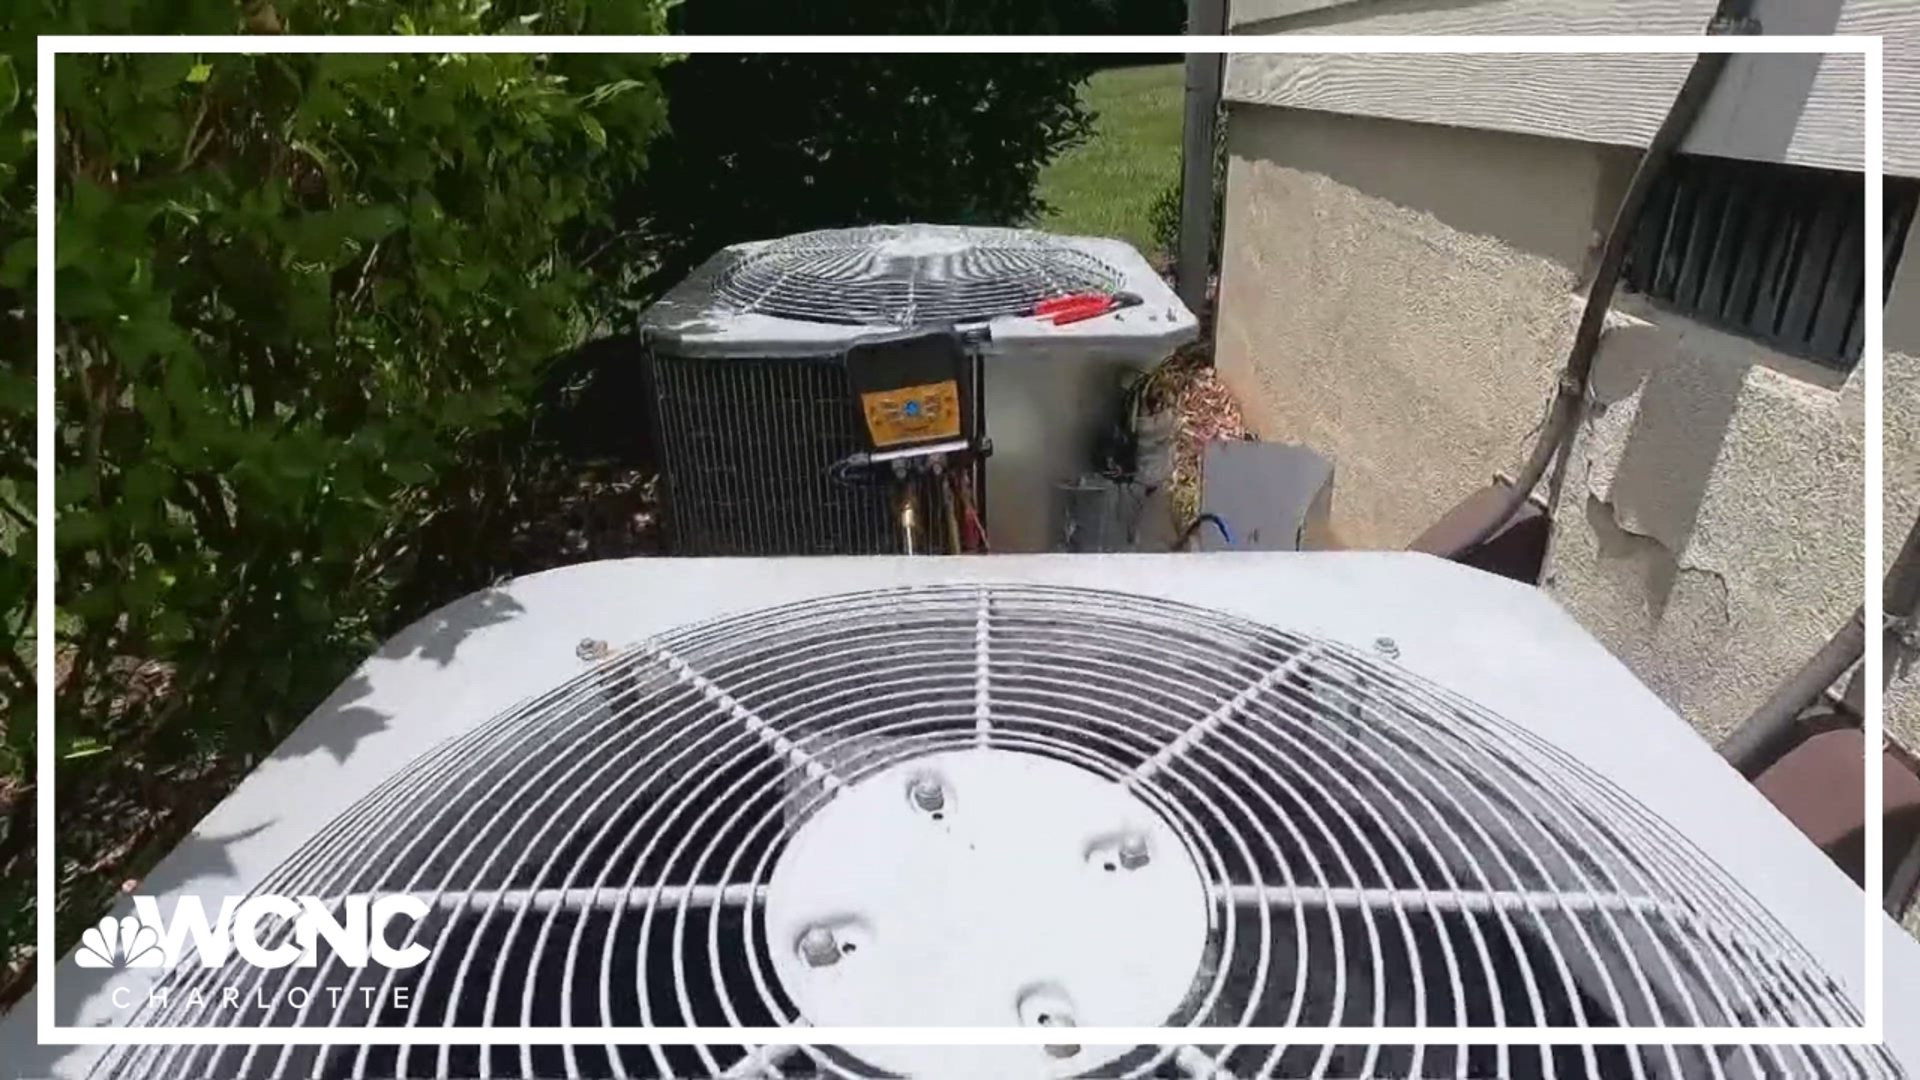 HVAC companies in the Charlotte area have been working overtime to keep the community cool as the excessive heat continues across the region.